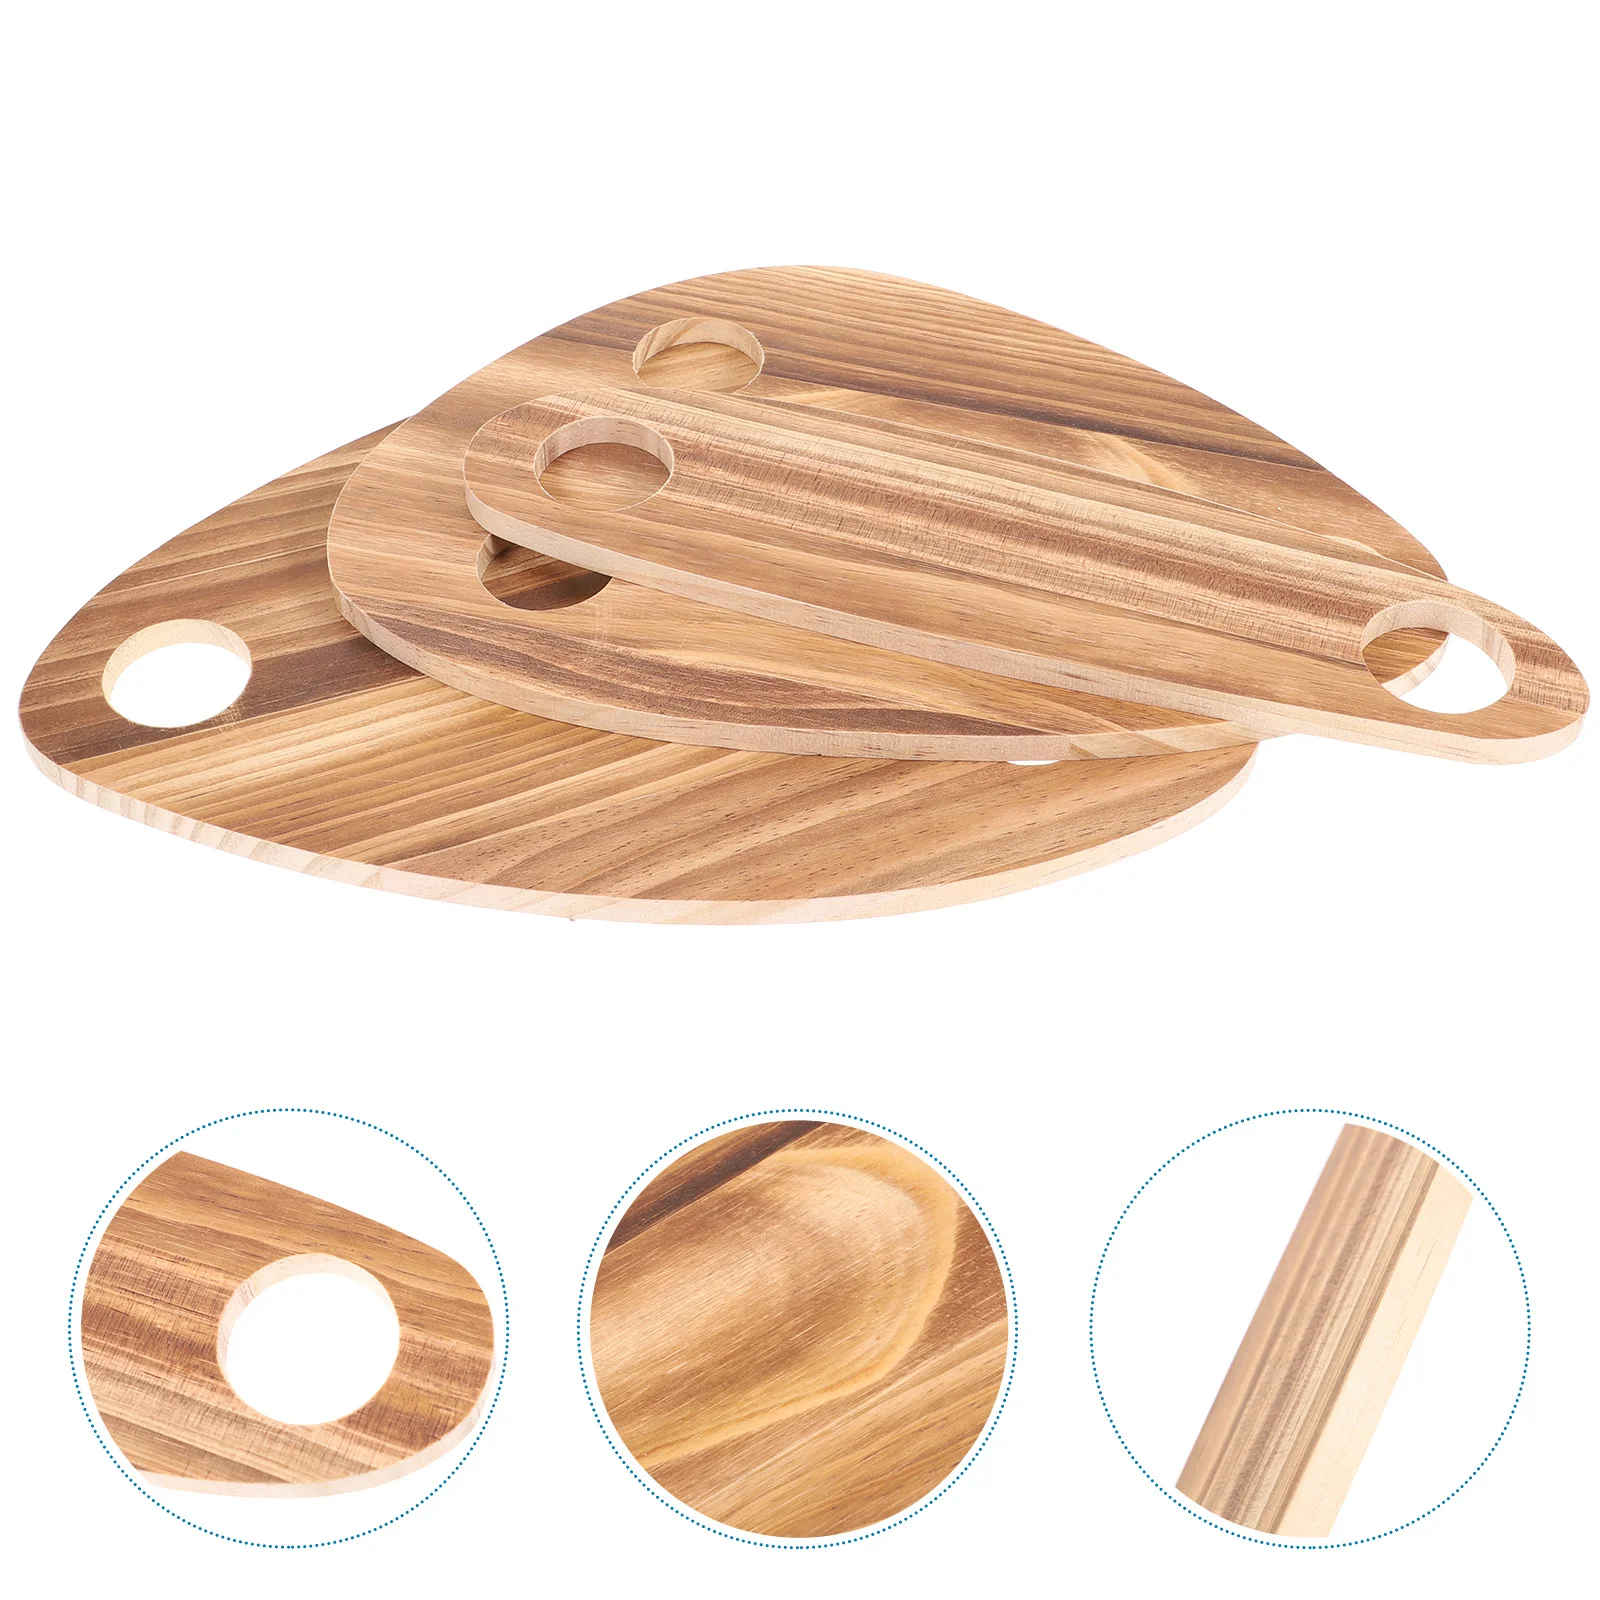 

Tray Bottleserving Trays Topper Cheese Boards Floating Wooden Board Platter Plate Picnic Charcuterie Wood Appetizer Holder